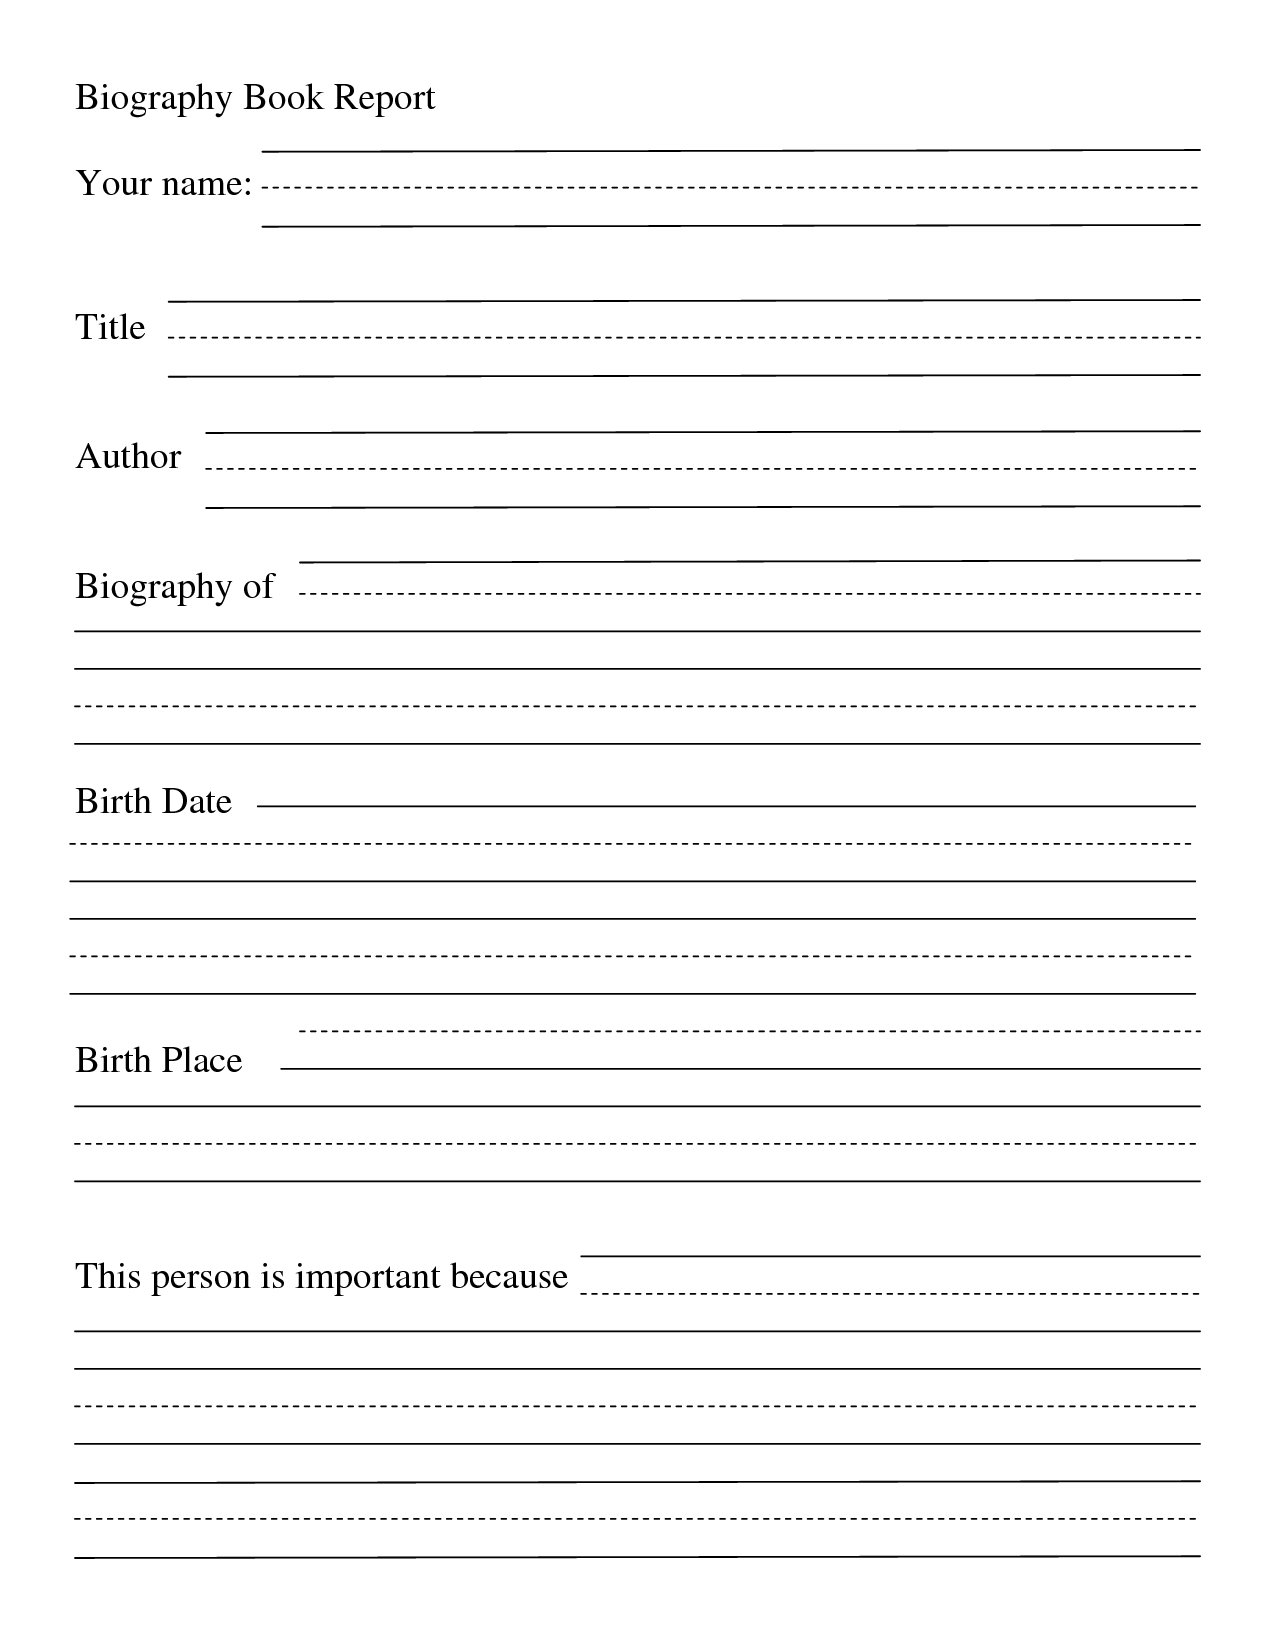 004 Biography Book Report Template Formidable Ideas Form For Intended For Biography Book Report Template